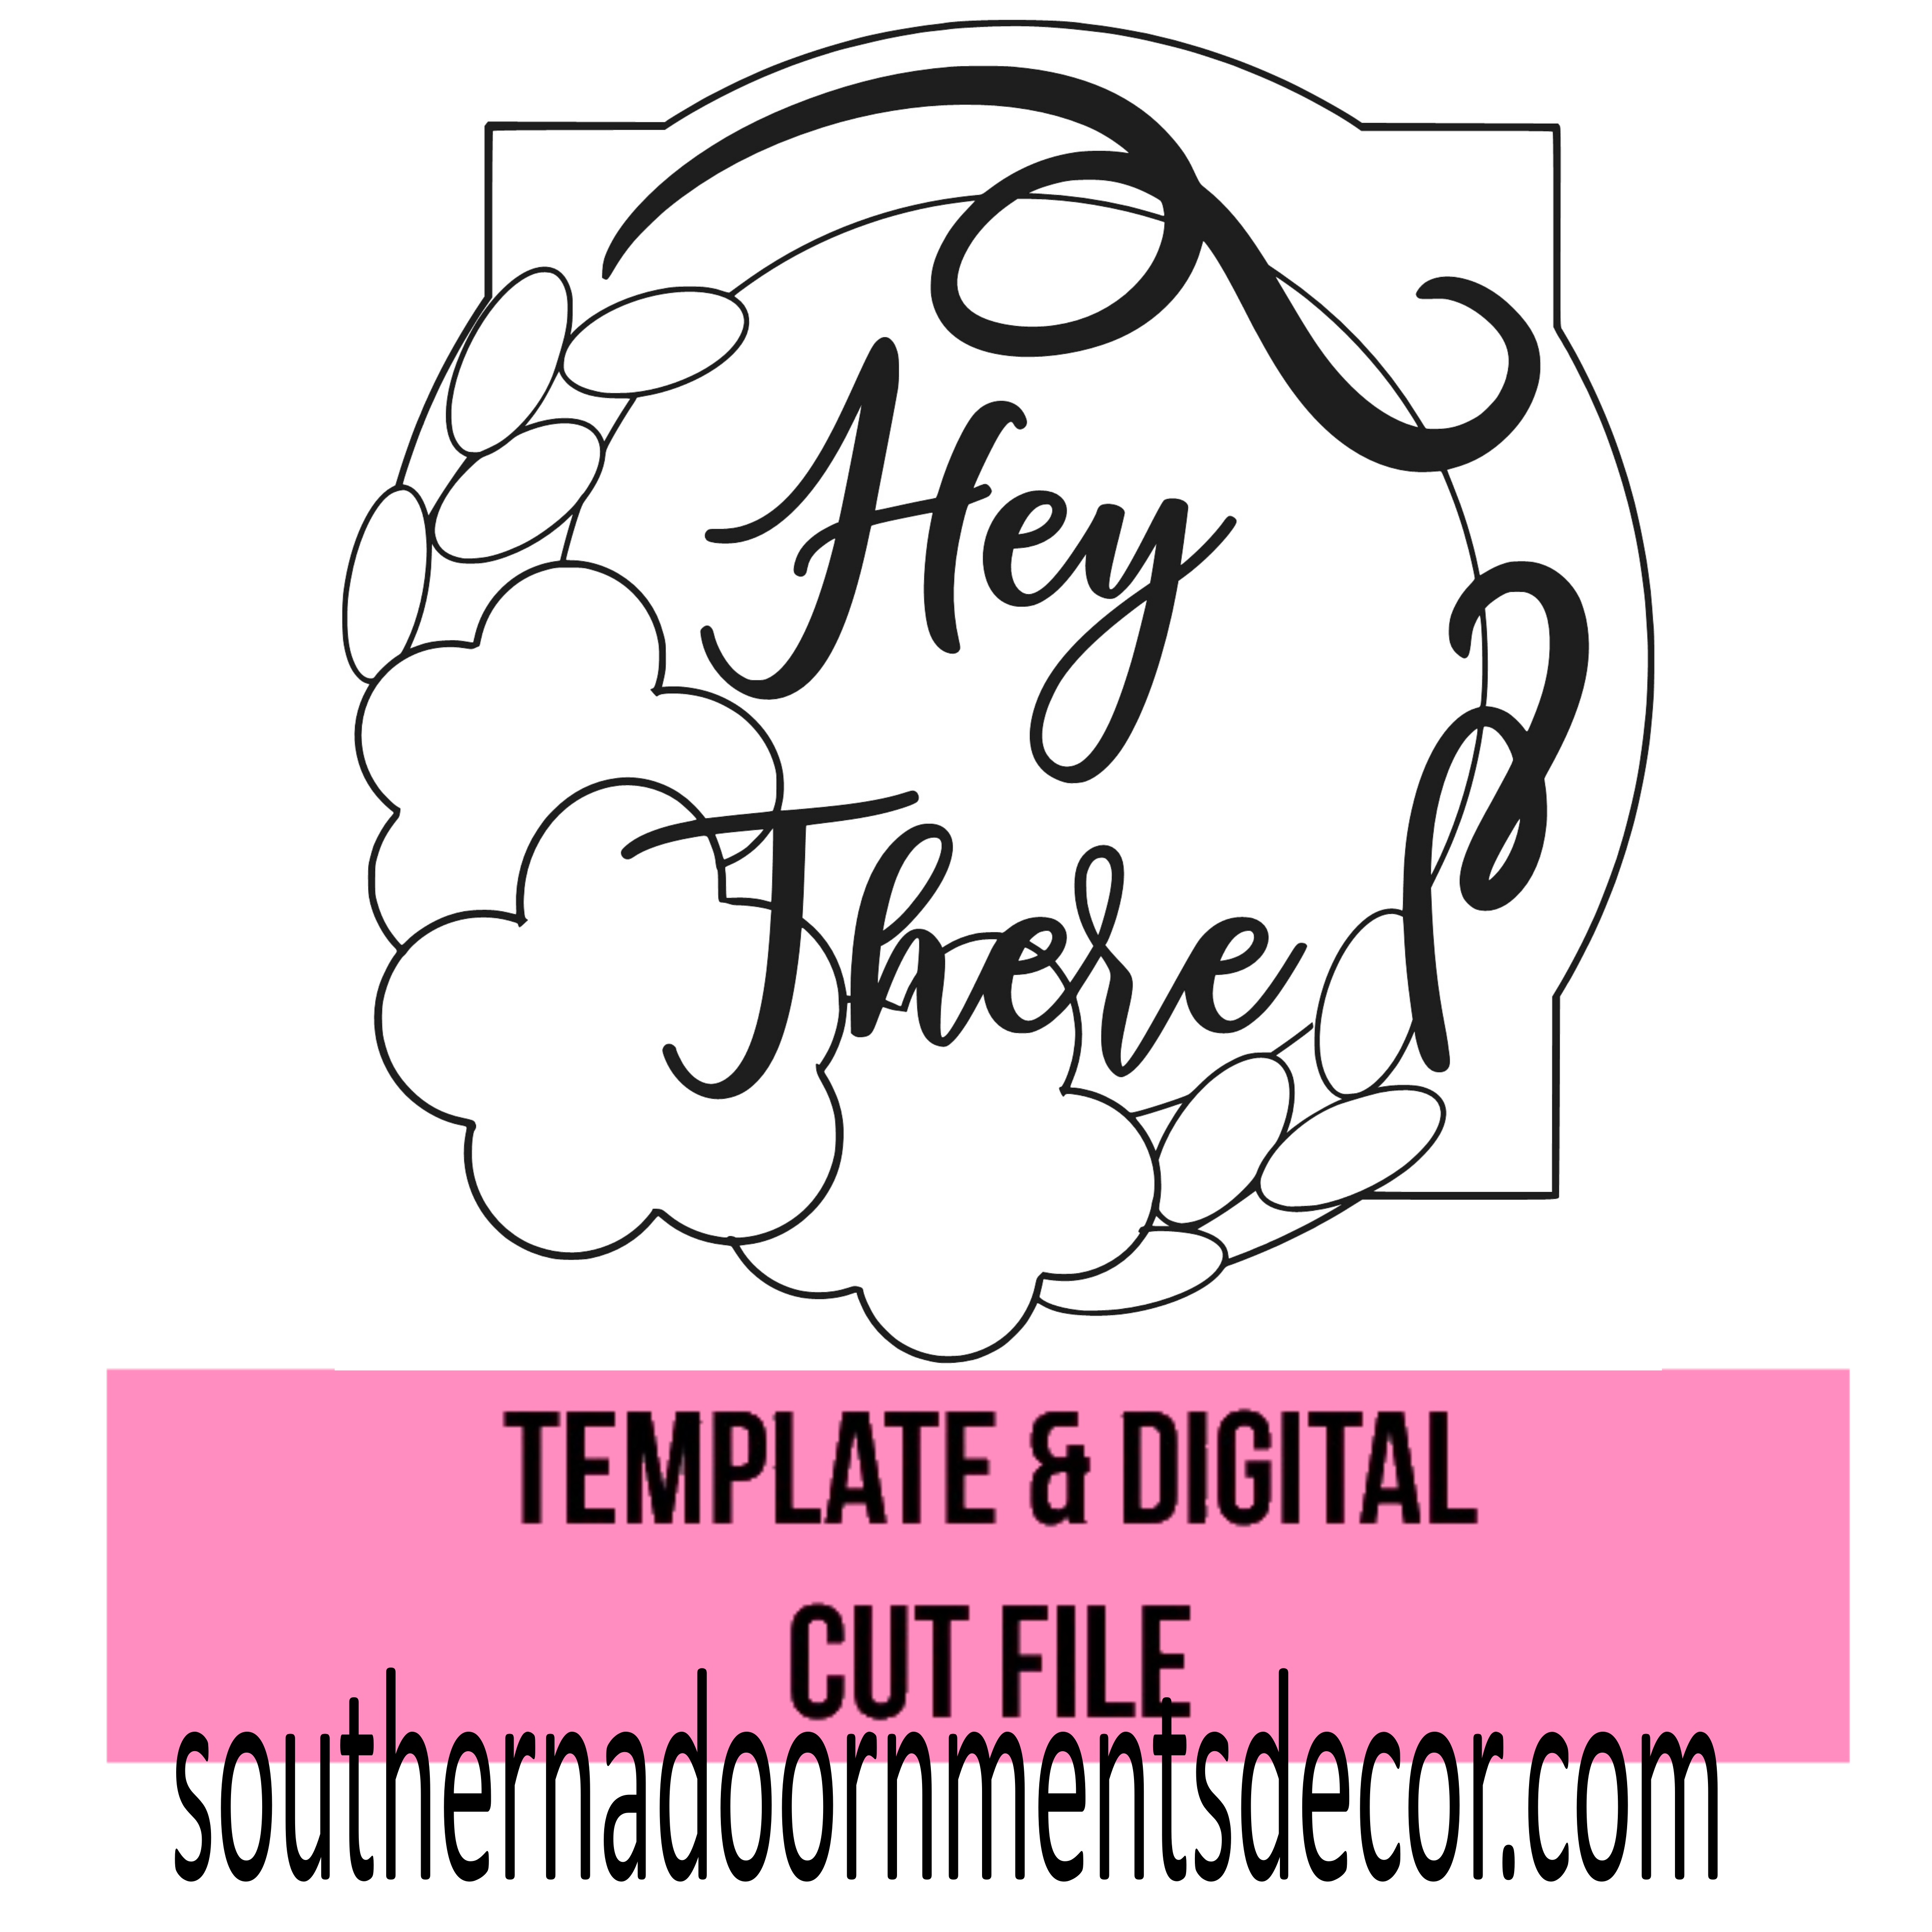 Hey There Template & Digital Cut File